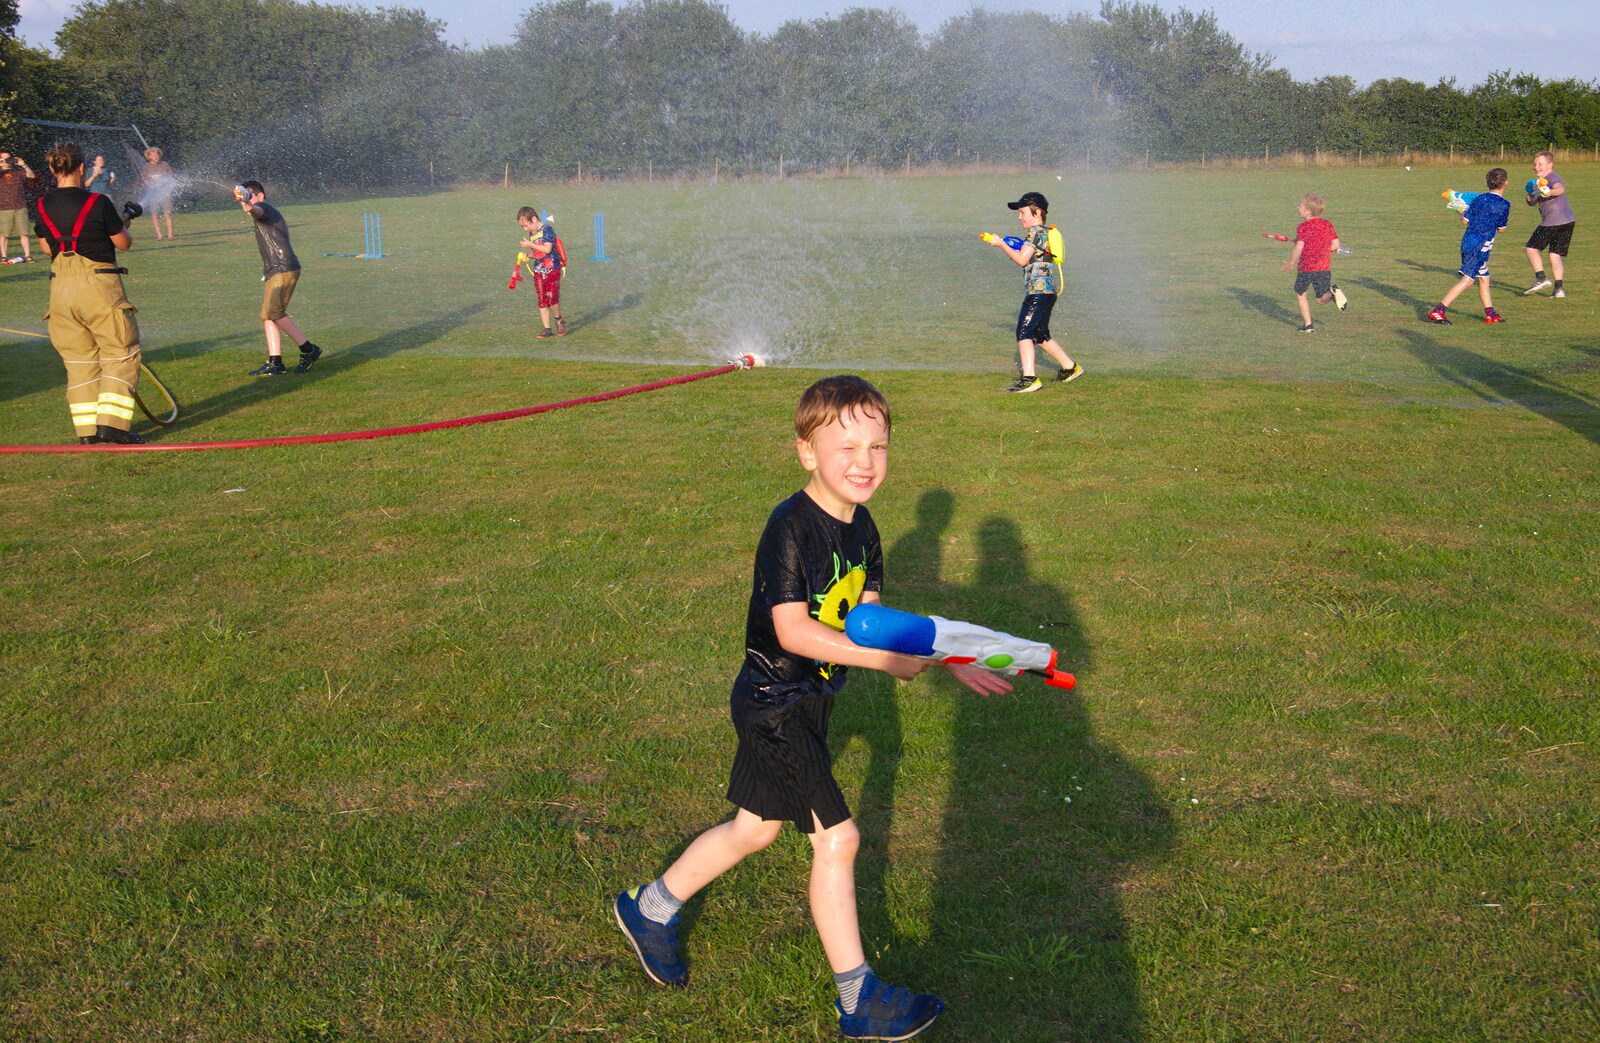 Running around near the spray wall from A Water Fight with a Fire Engine, Eye Cricket Club, Suffolk - 5th August 2019